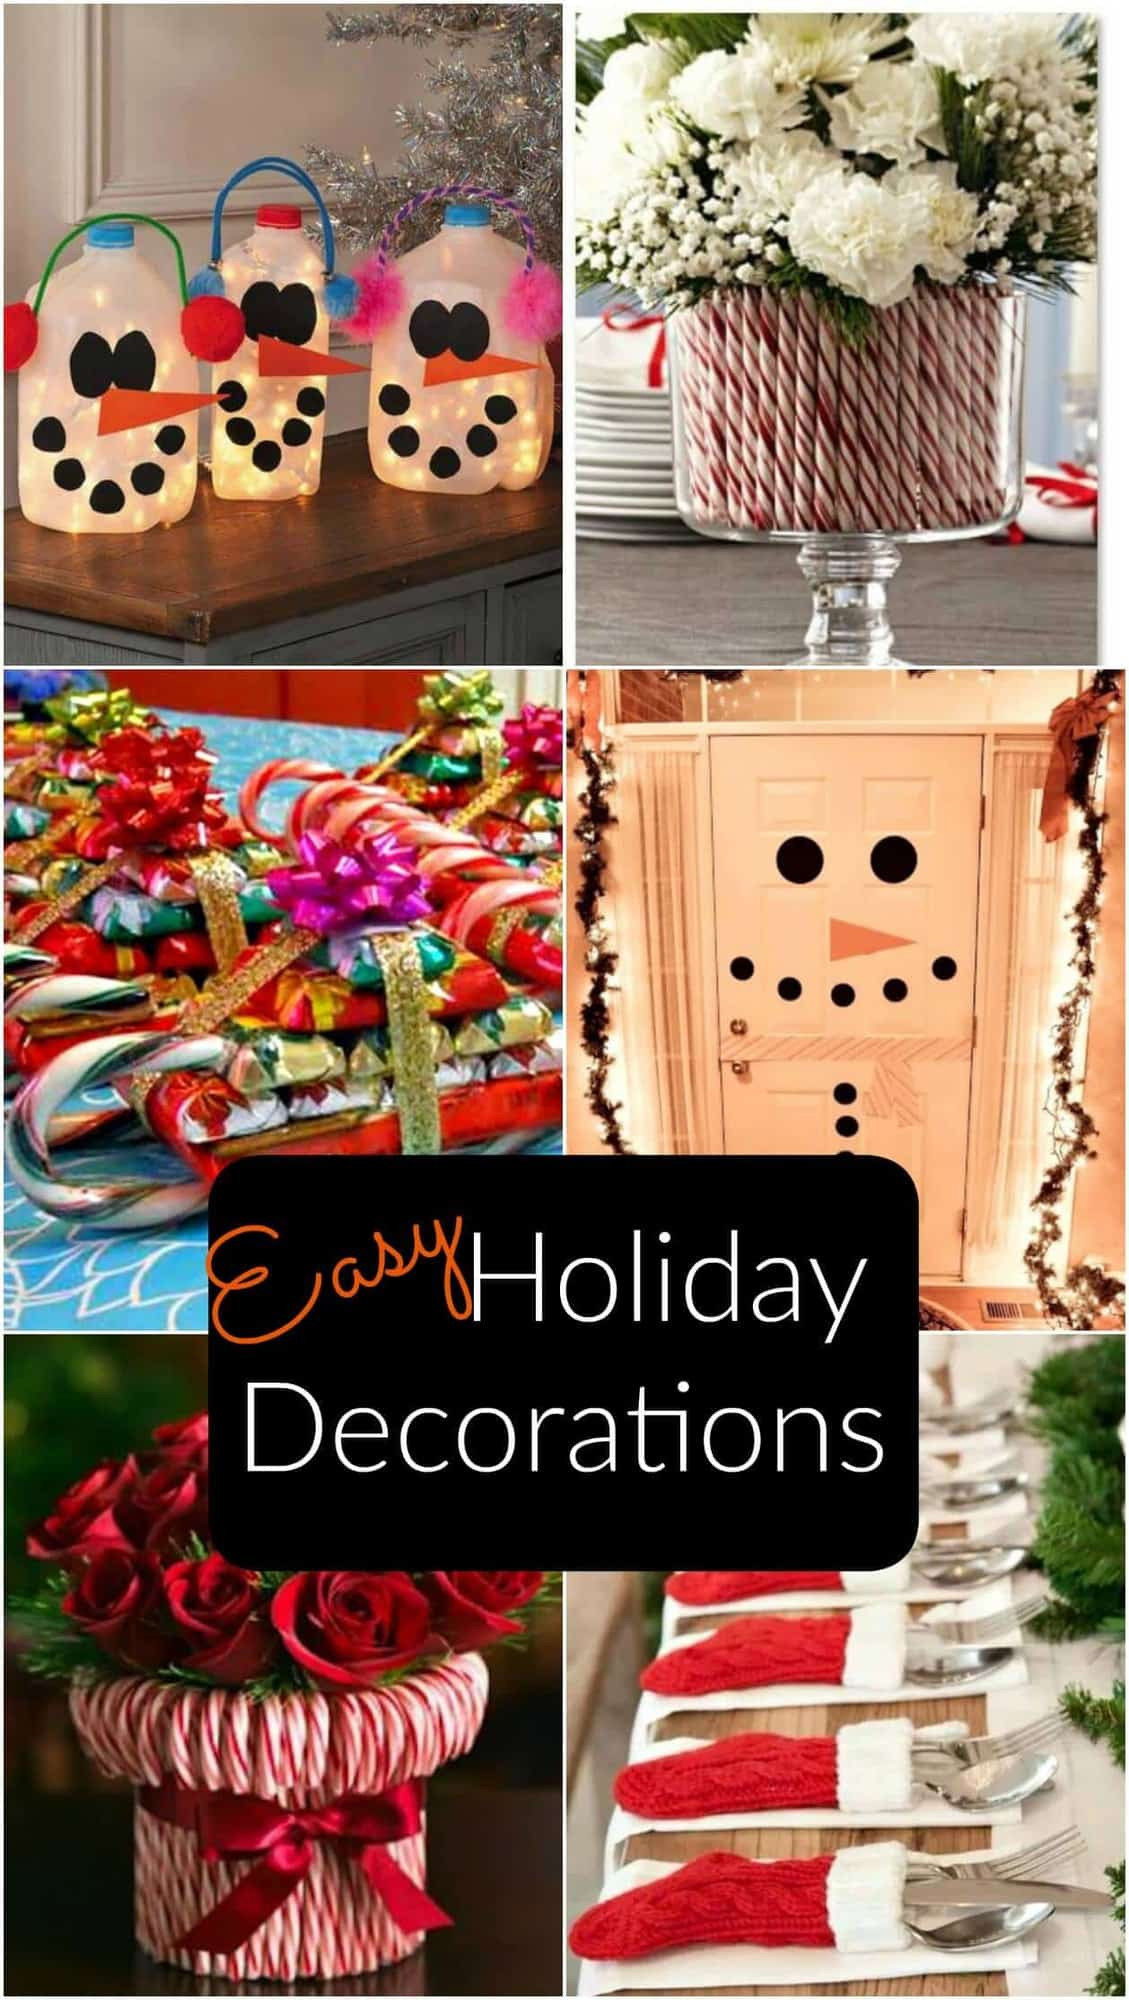 Easy DIY Decorations
 Cute & Easy Holiday Decorations Page 2 of 2 Princess